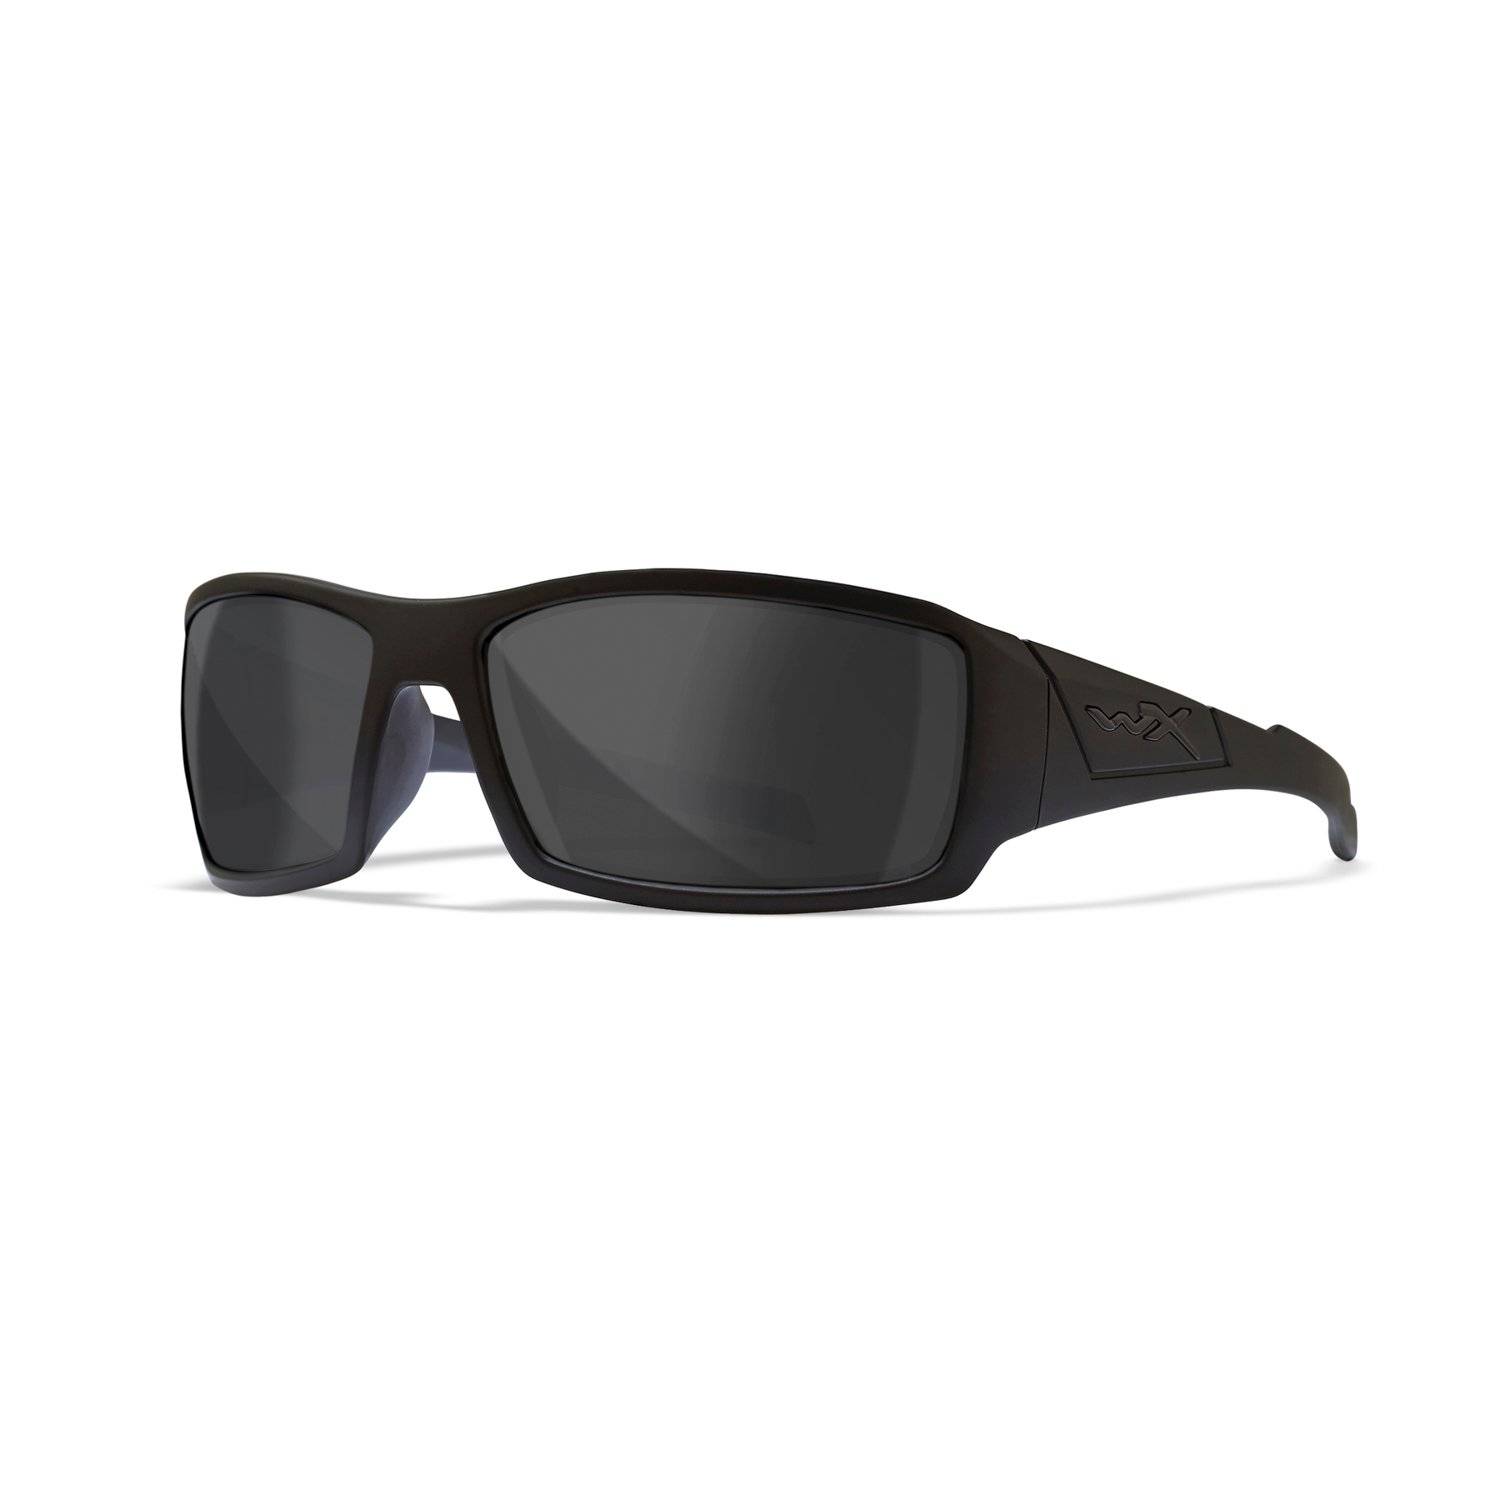 WILEY X WX TWISTED SUNGLASSES